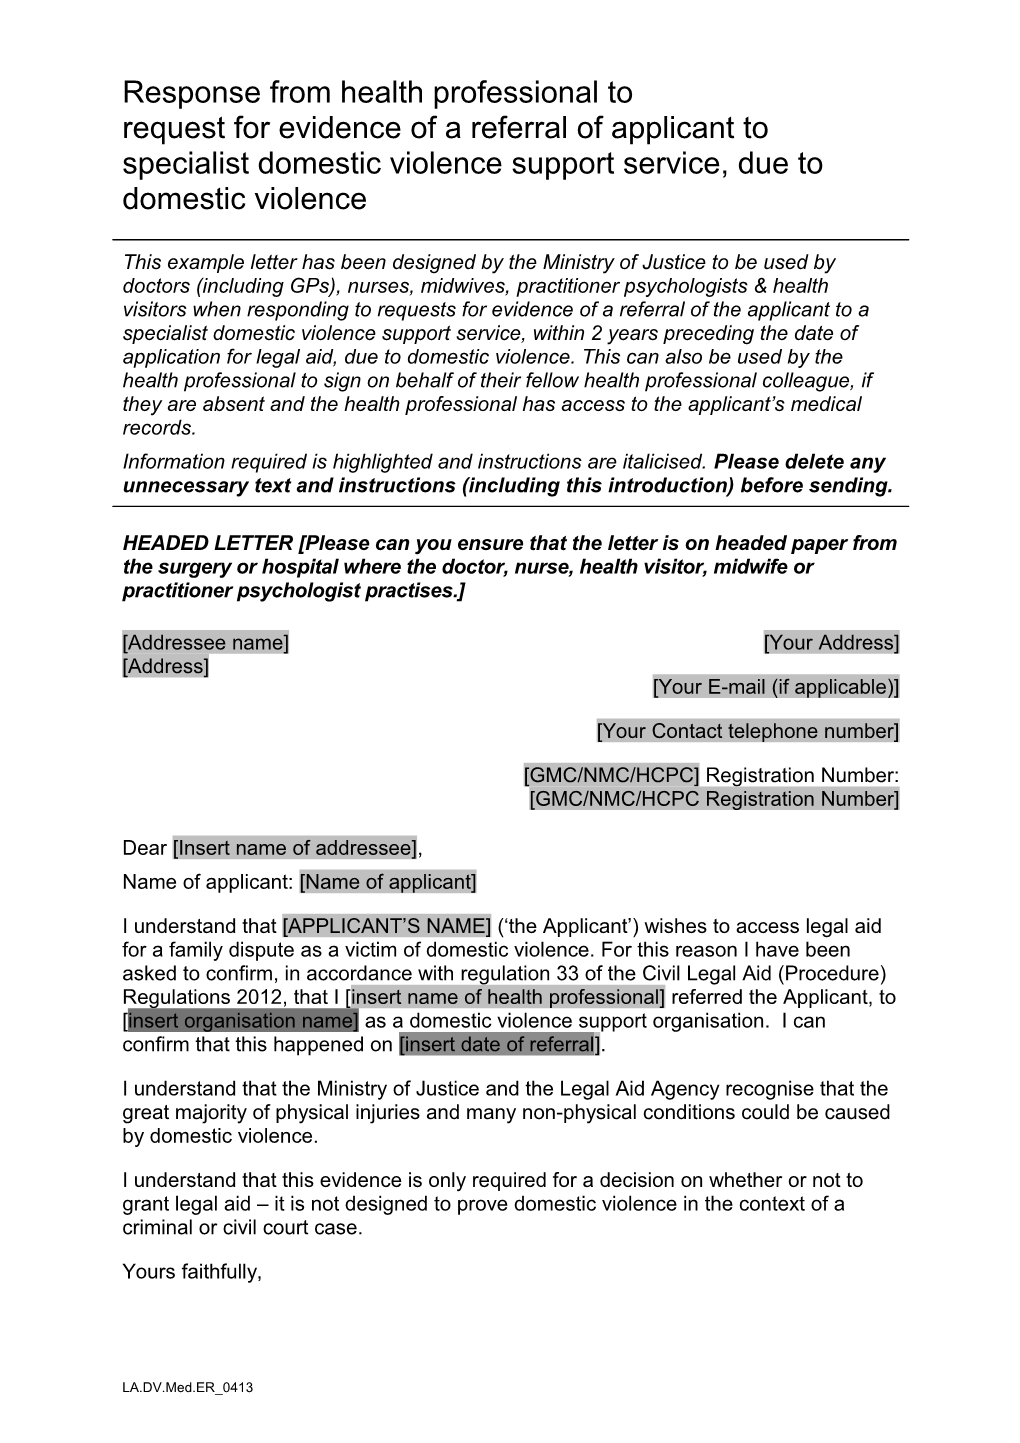 Template Letter for Medical Evidence of Domestic Violence s1